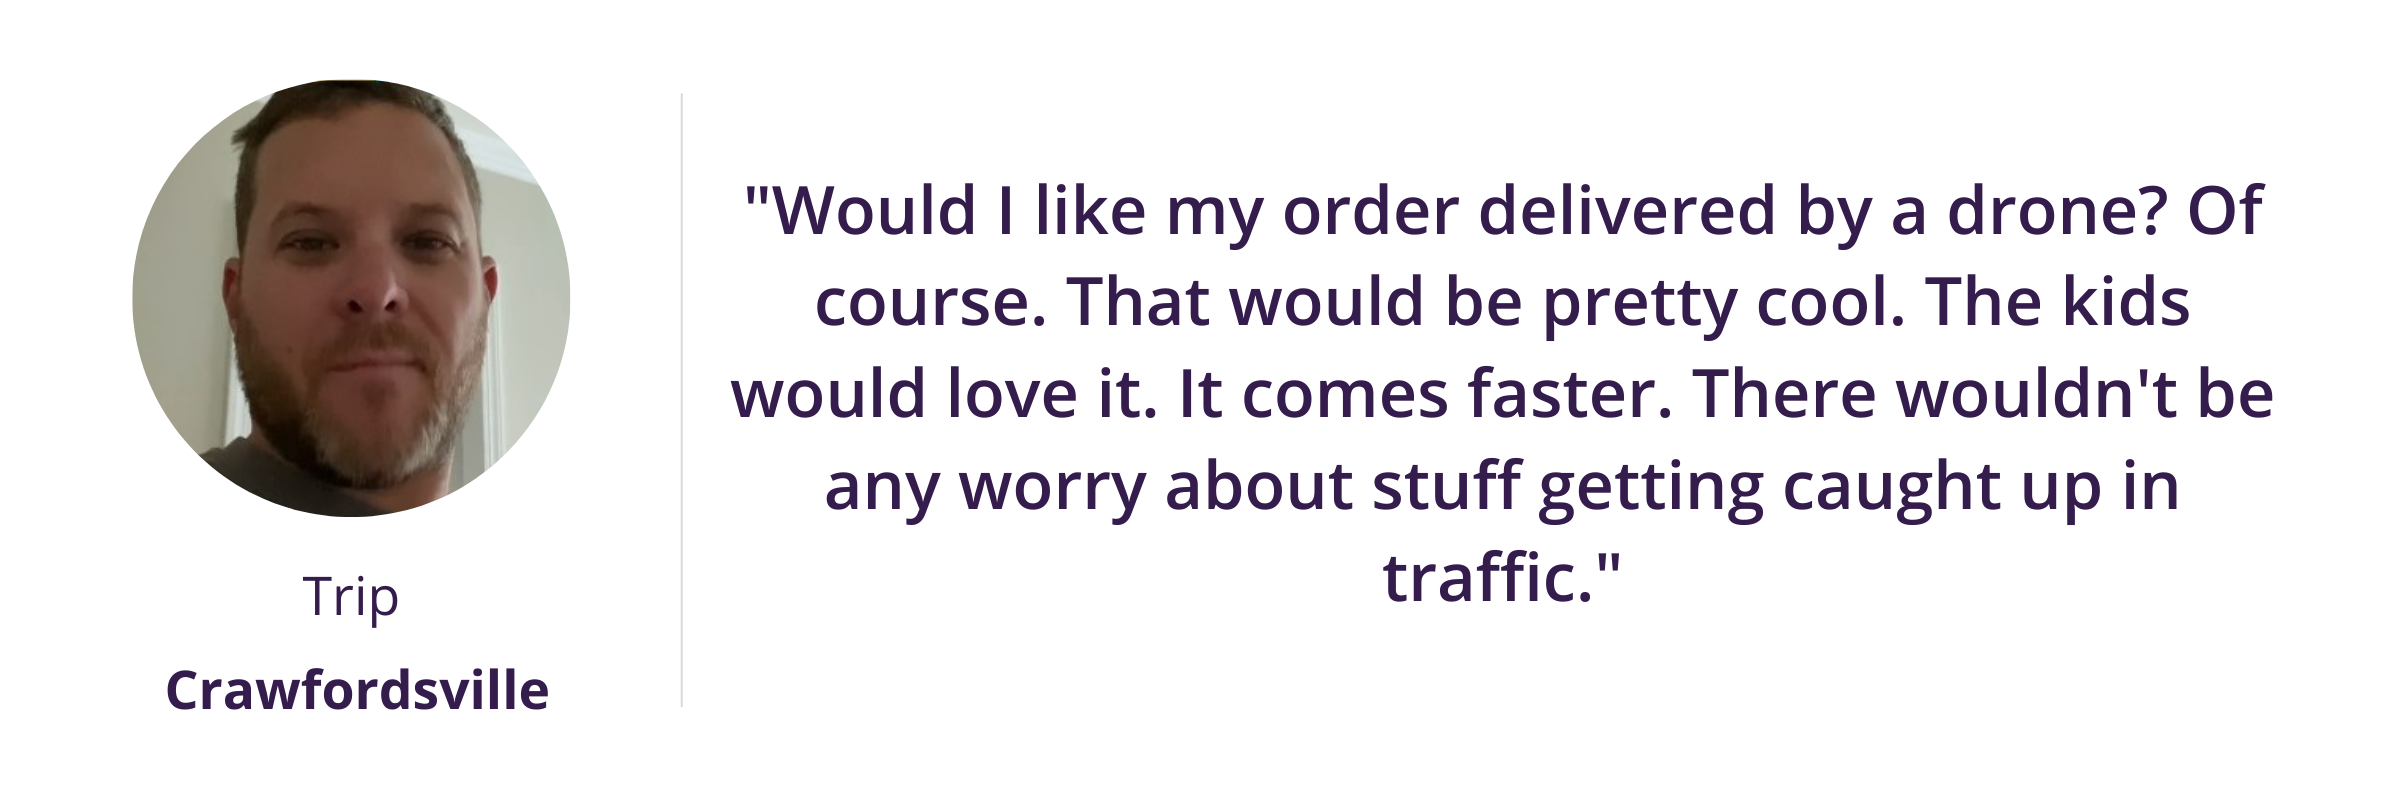 "Would I like my order delivered by a drone? Of course. That would be pretty cool. The kids would love it. It comes faster. There wouldn't be any worry about stuff getting caught up in traffic."